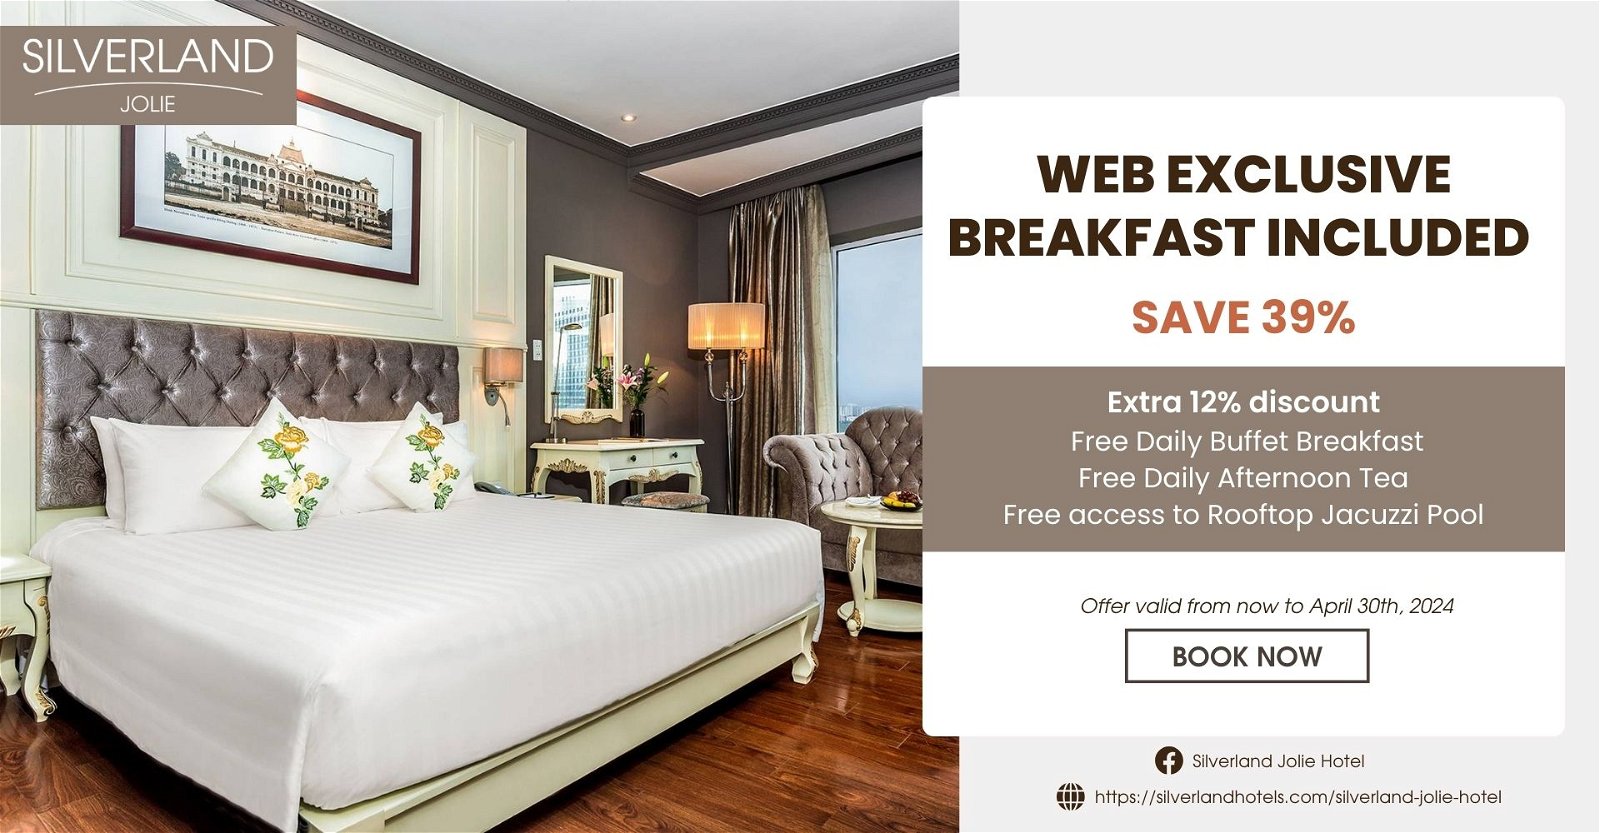 SILVERLAND JOLIE – WEB EXCLUSIVE – BREAKFAST INCLUDED (SAVE 39%)